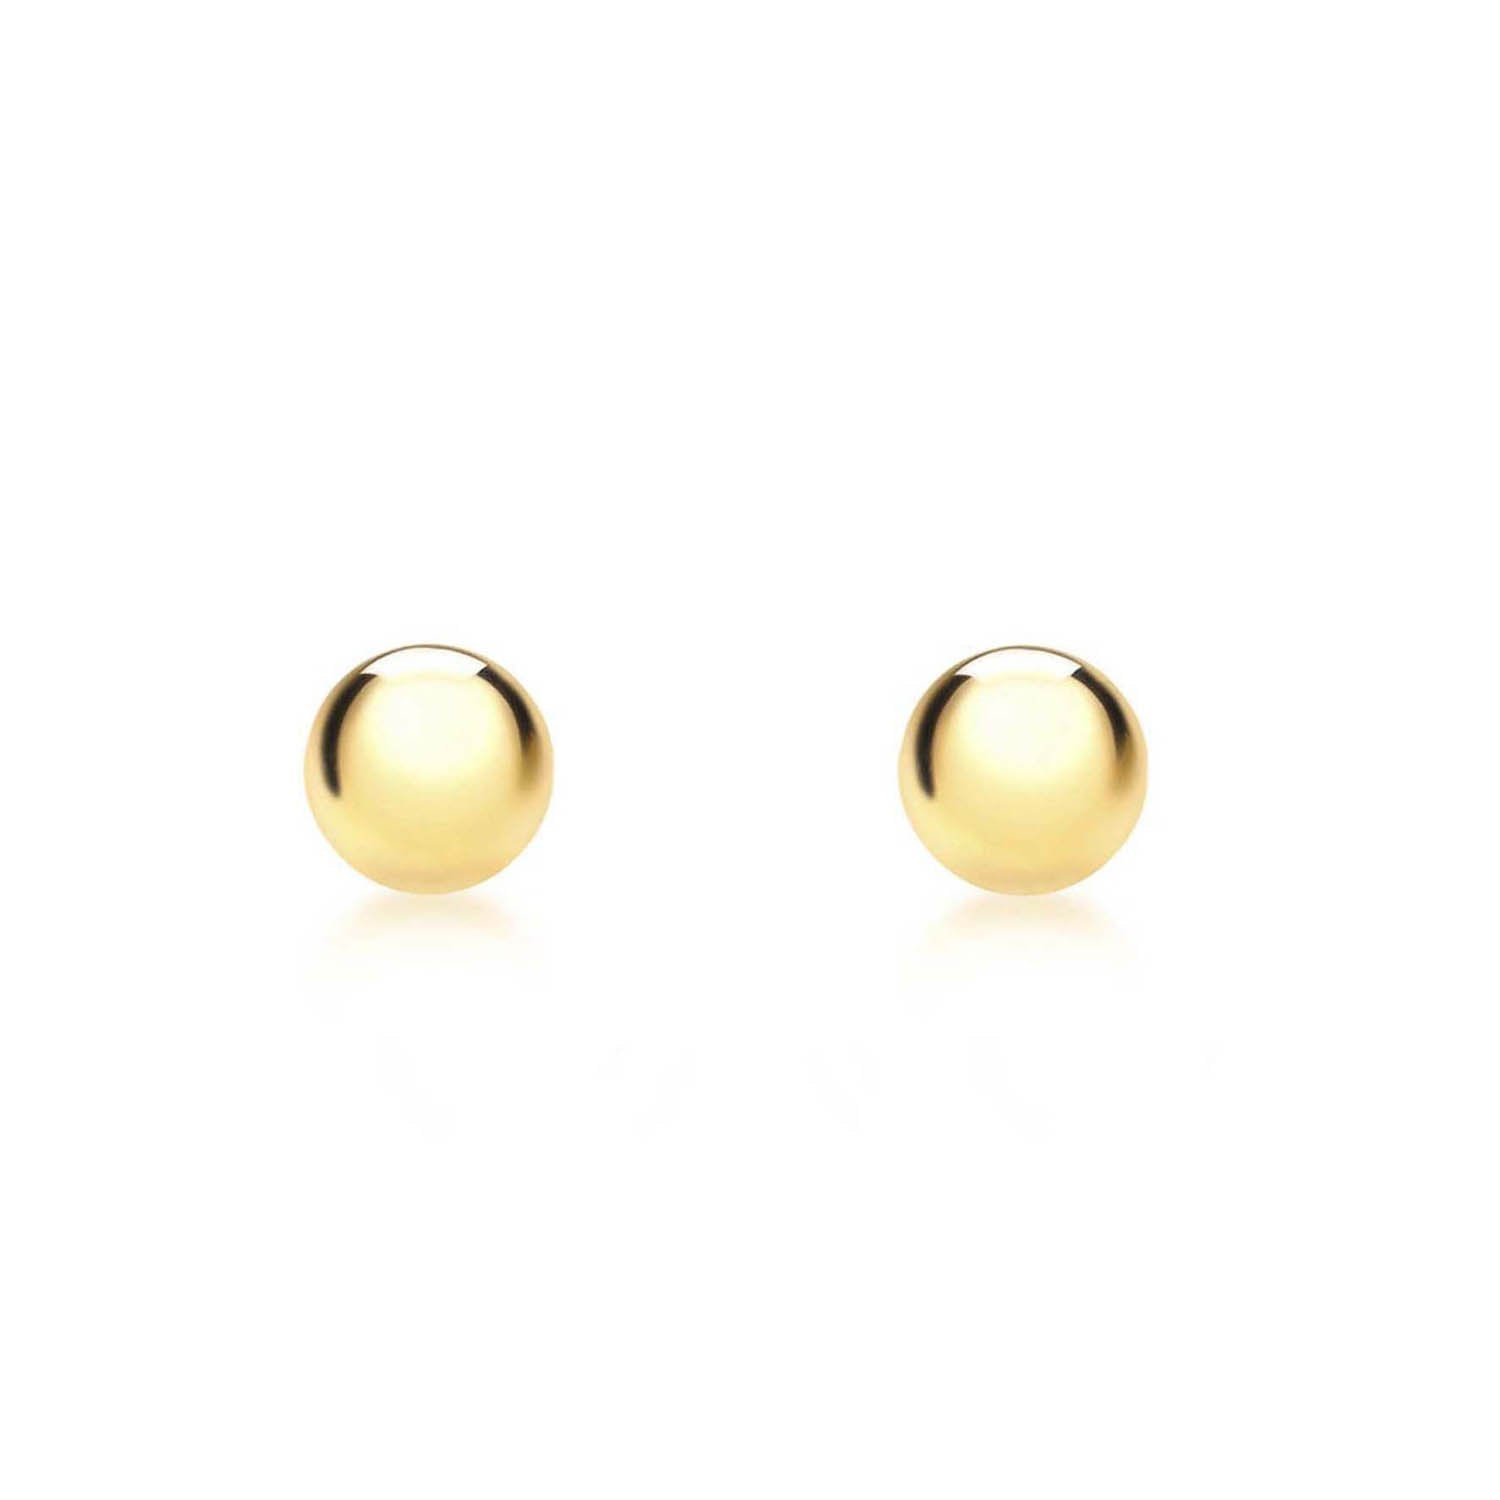 9ct Yellow Gold 3mm Polished Ball Stud Earrings